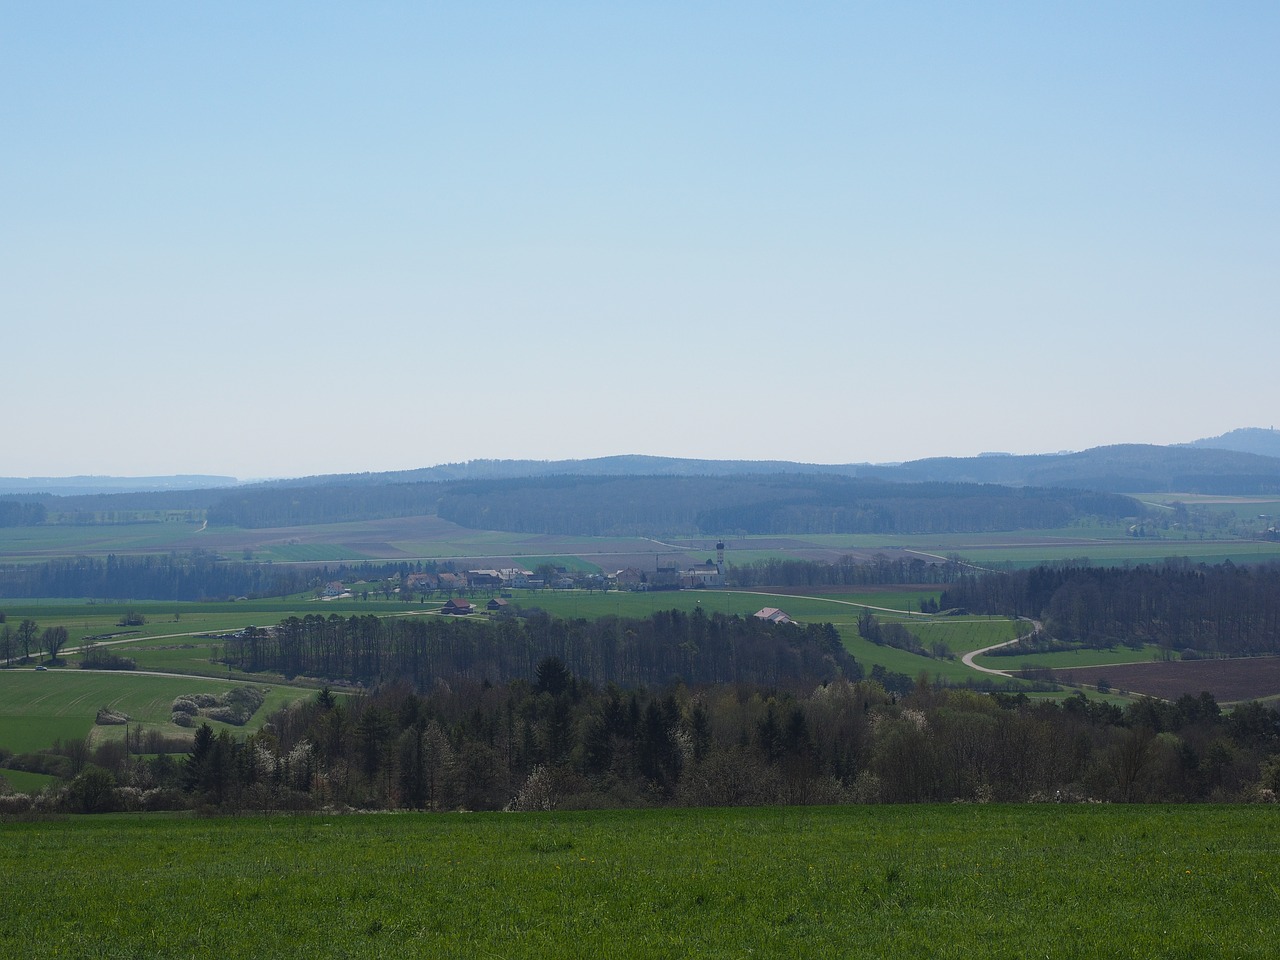 reported fields lauterach free photo